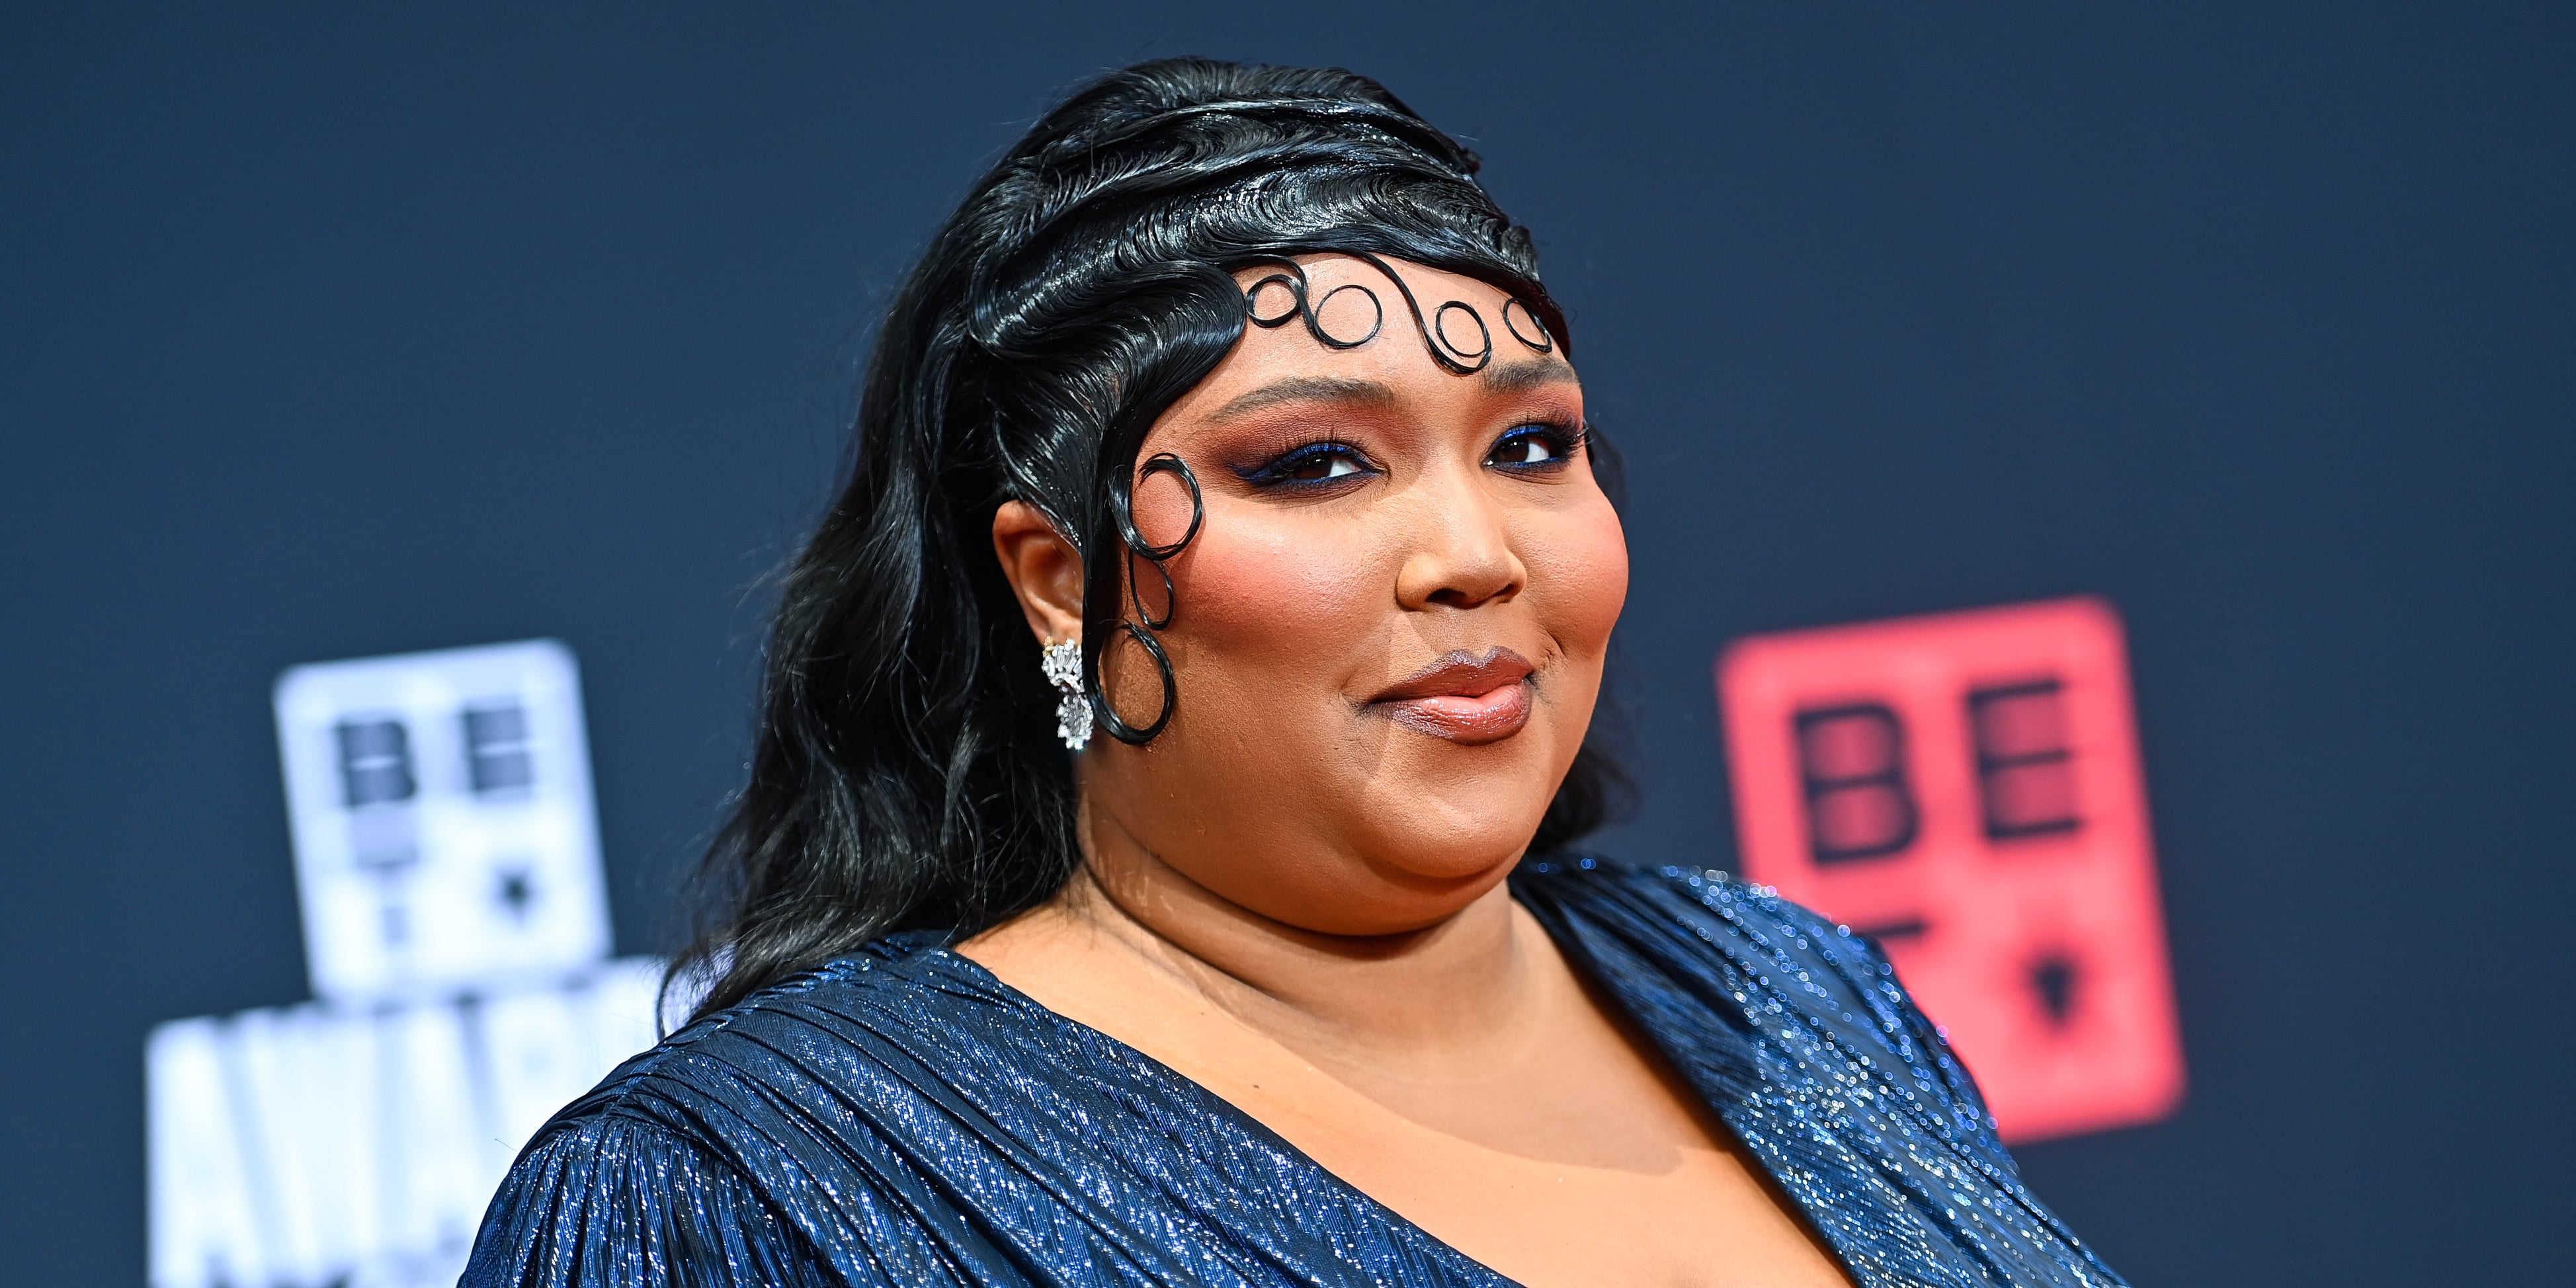 Lizzo Models a New Yitty Onesie on Instagram